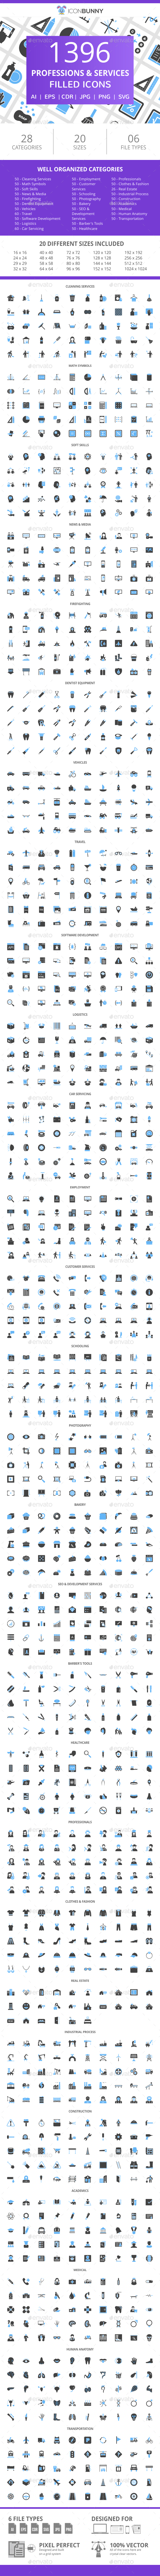 1396 Professions & Services Filled Blue & Black Icons